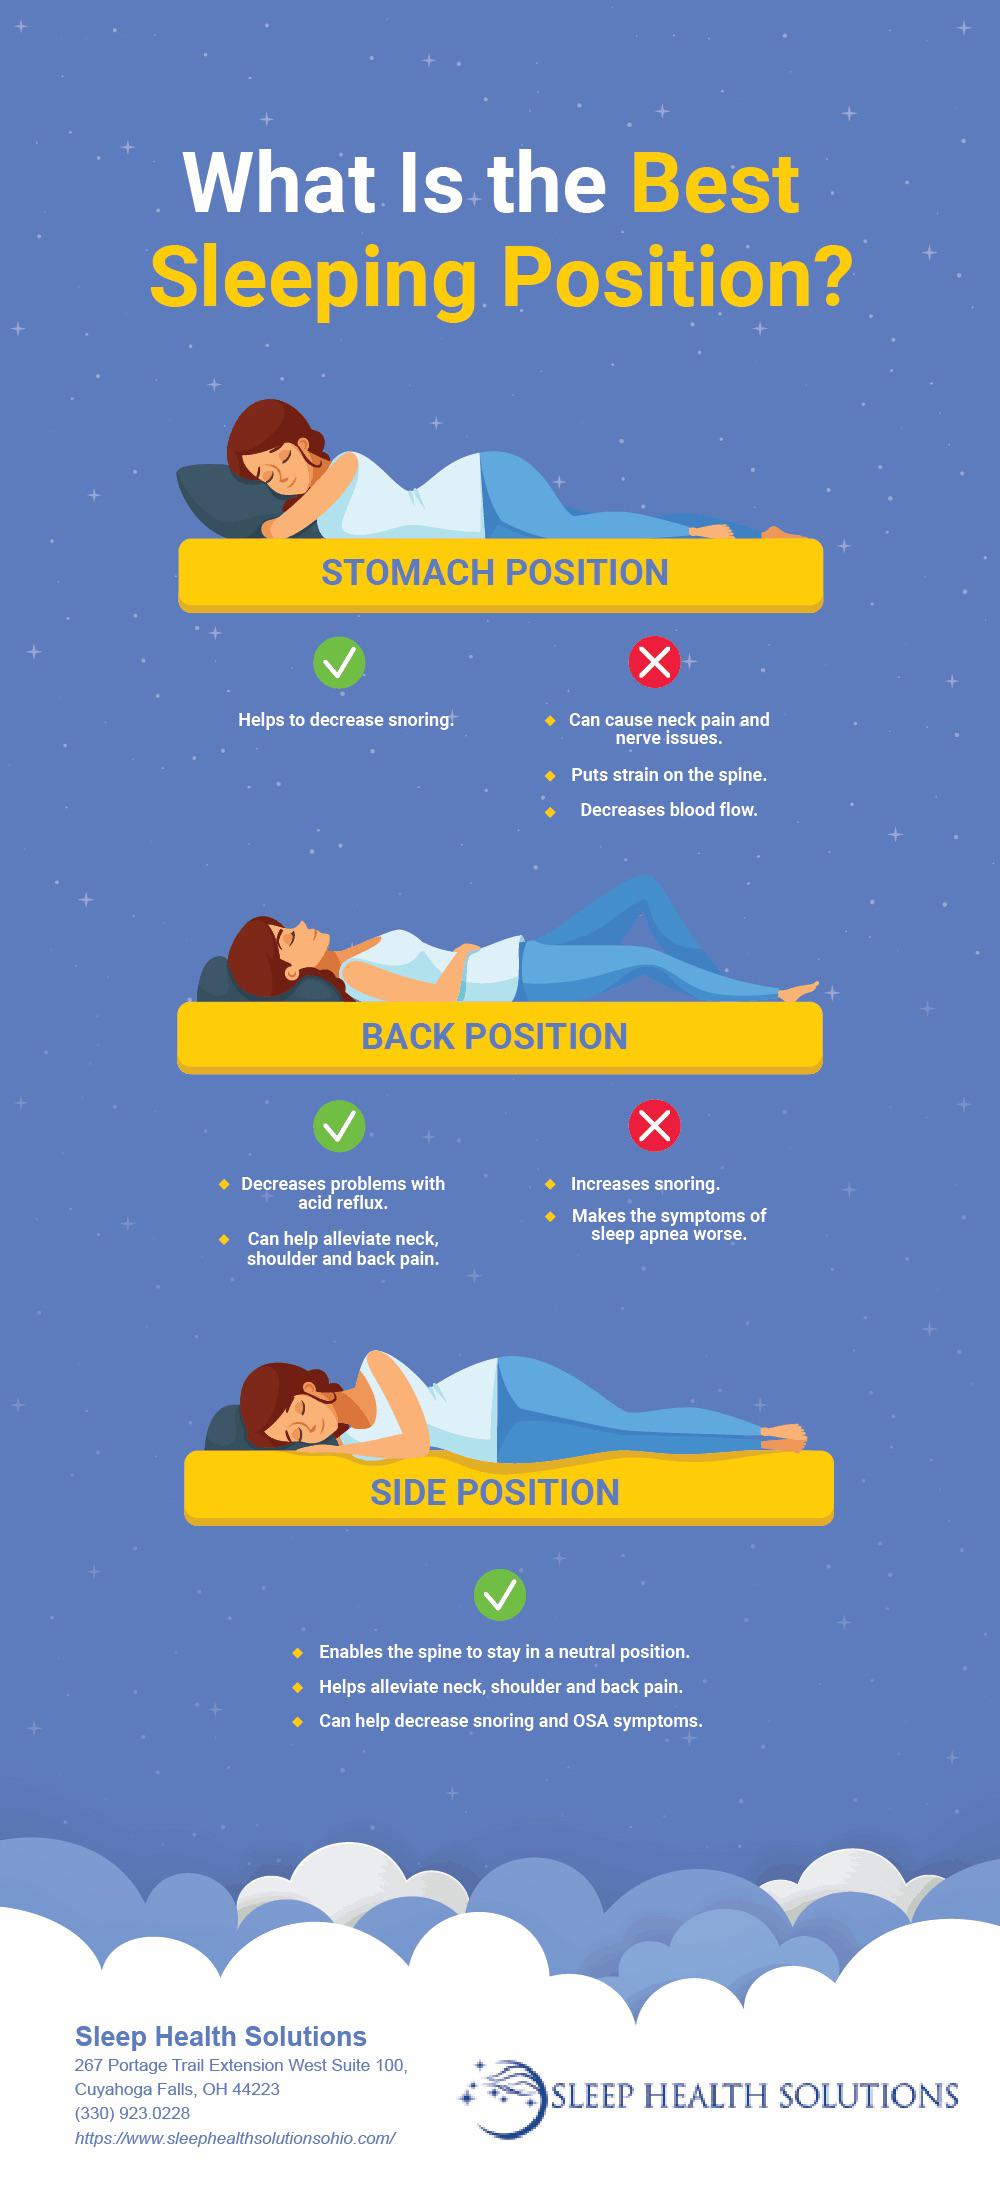 Different sleeping positions and their pros vs. cons.